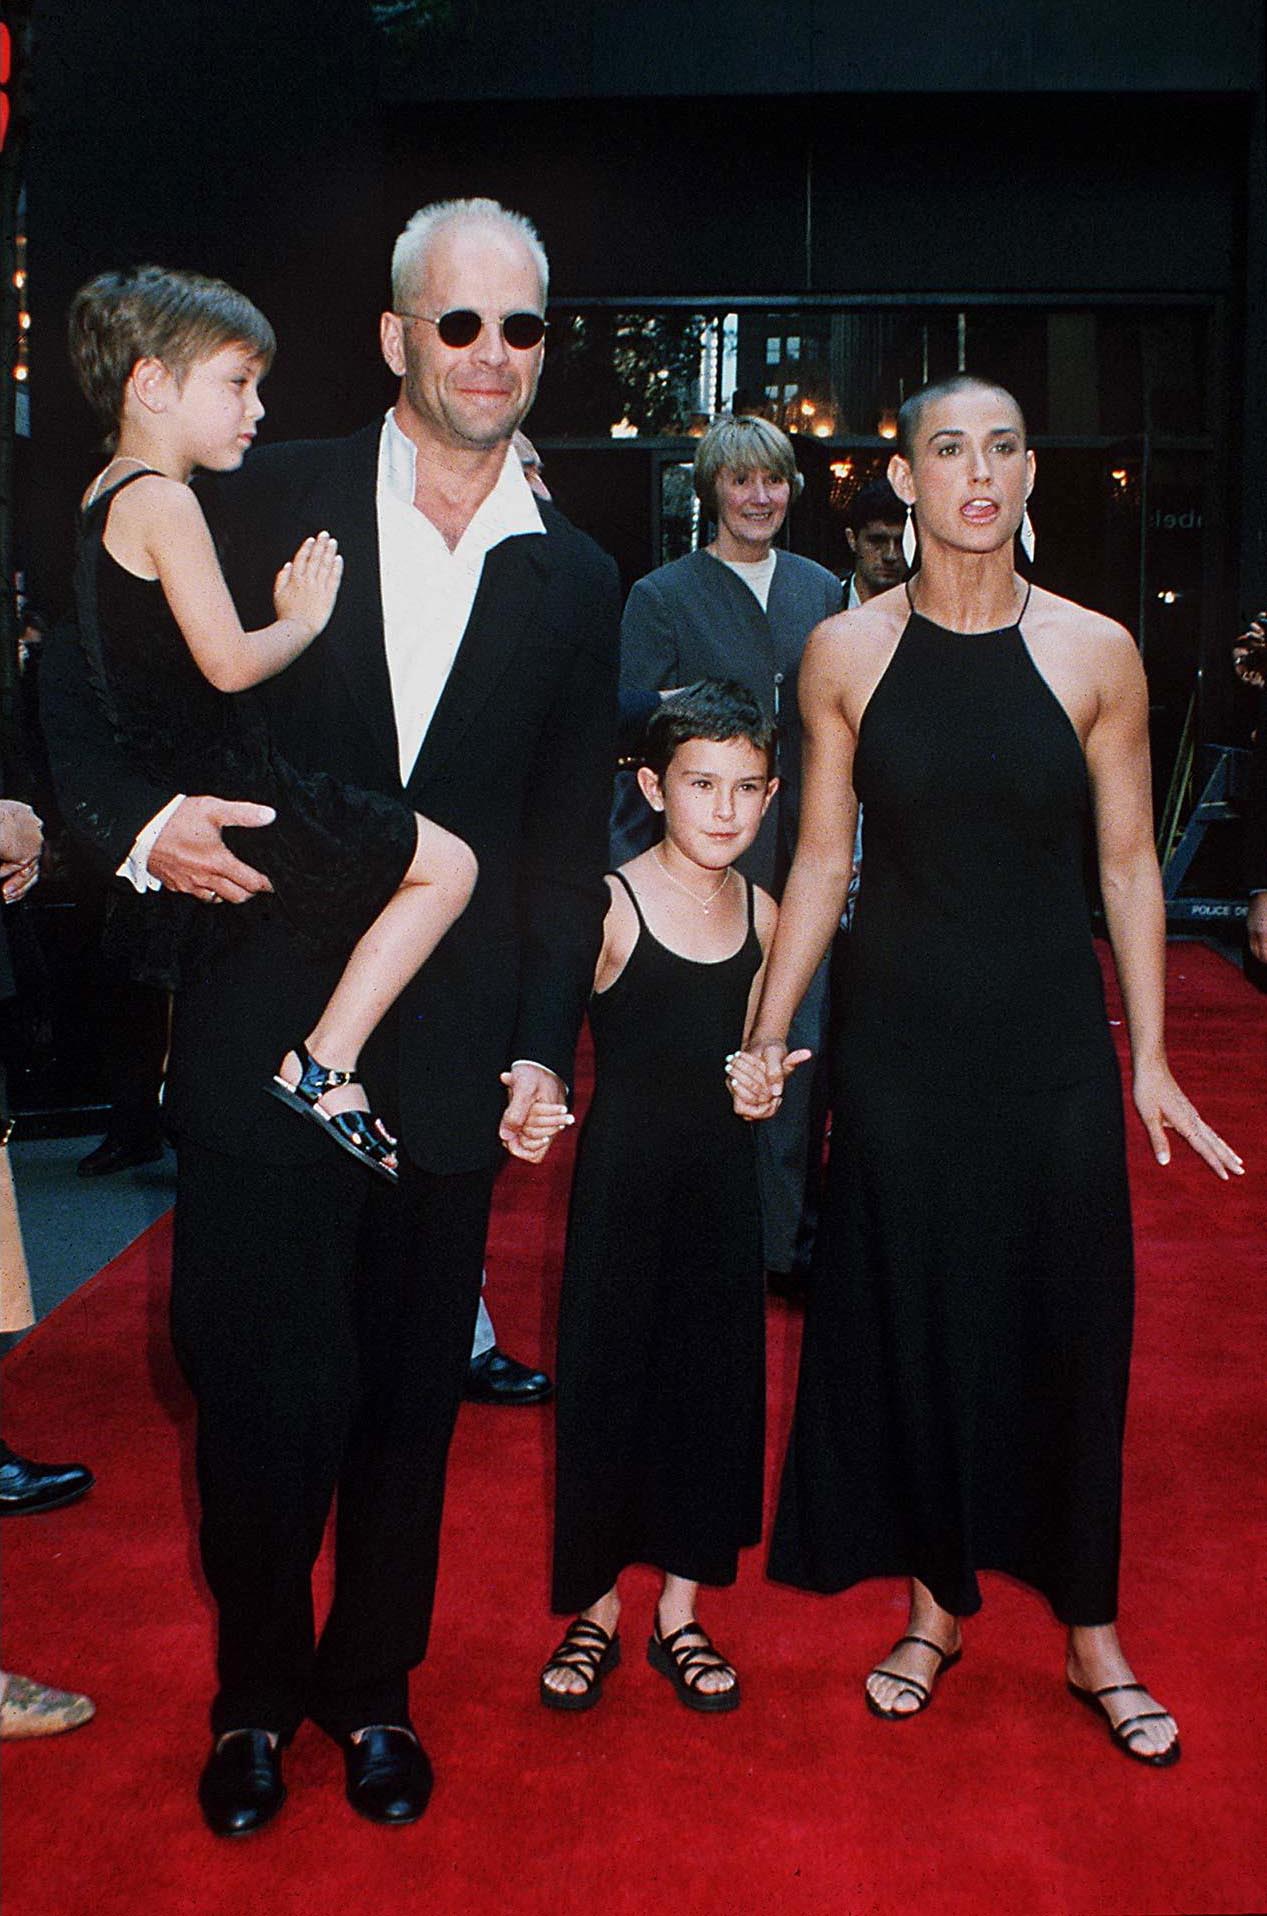 Demi Moore Young vs. Now: See Her Transformation in Photos